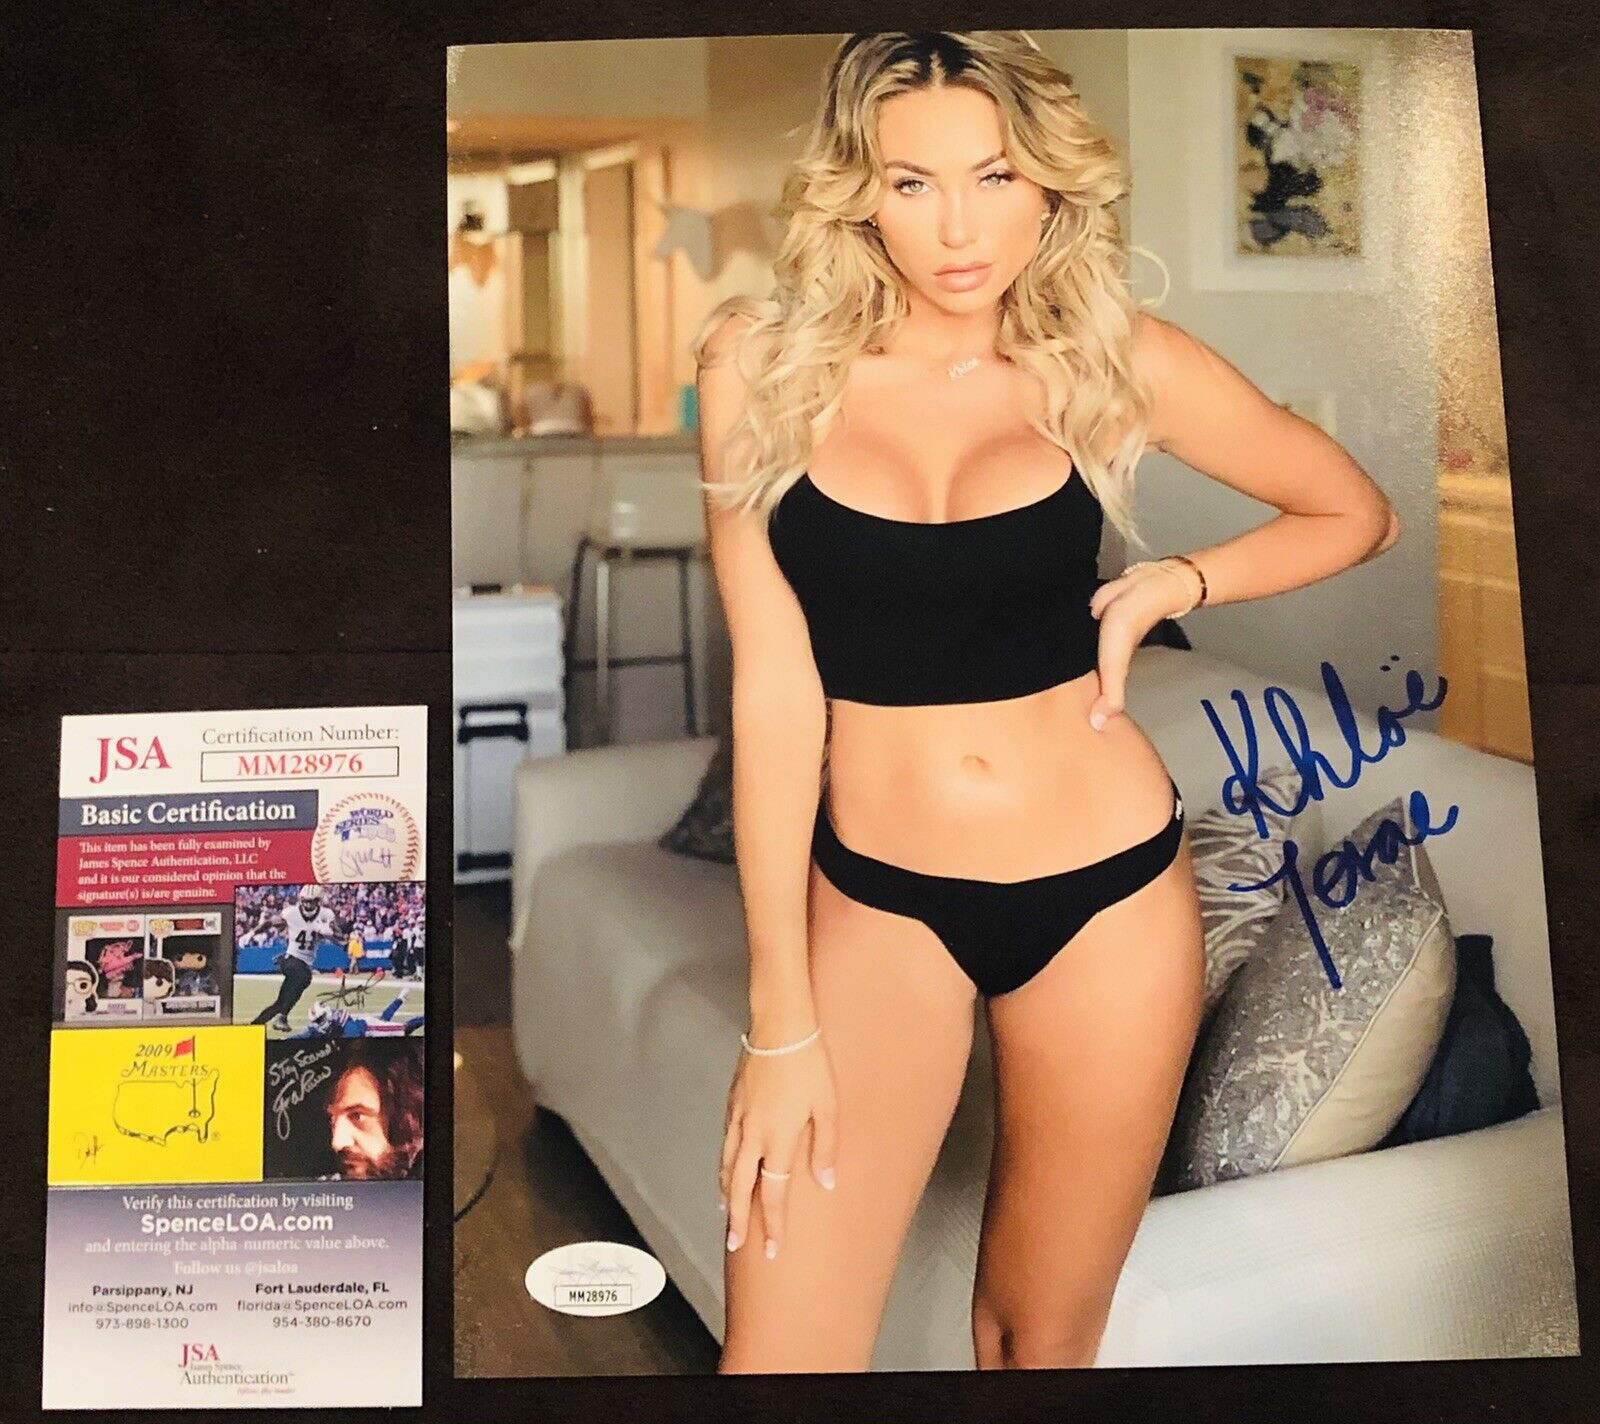 Khloe Terae Signed 8x10 Photo Poster painting ADULT STAR AUTOGRAPH Penthouse JSA Rare